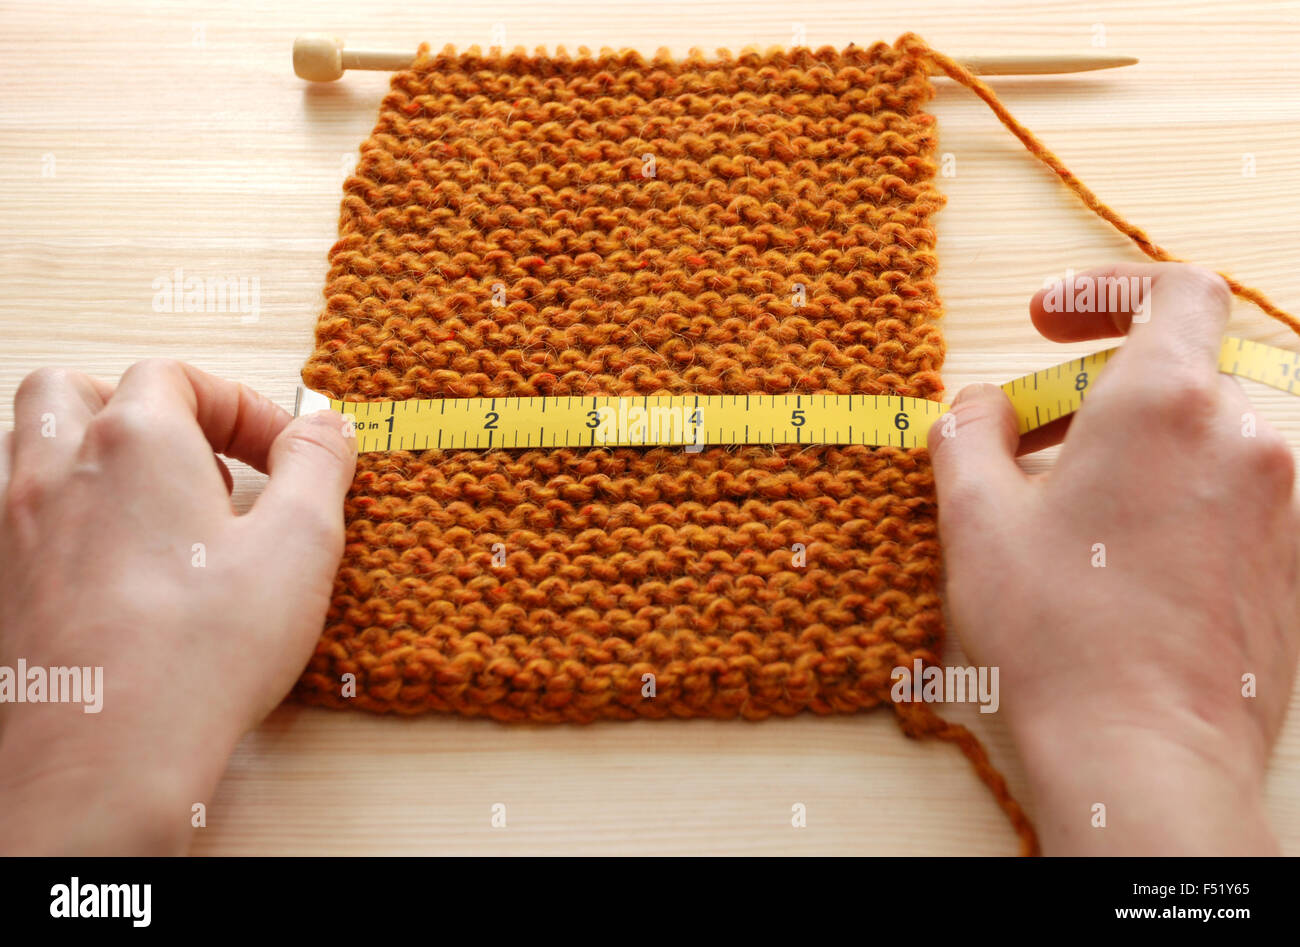 Two hands hold a tape measure across a piece of knitting on a wooden table, measuring in inches Stock Photo